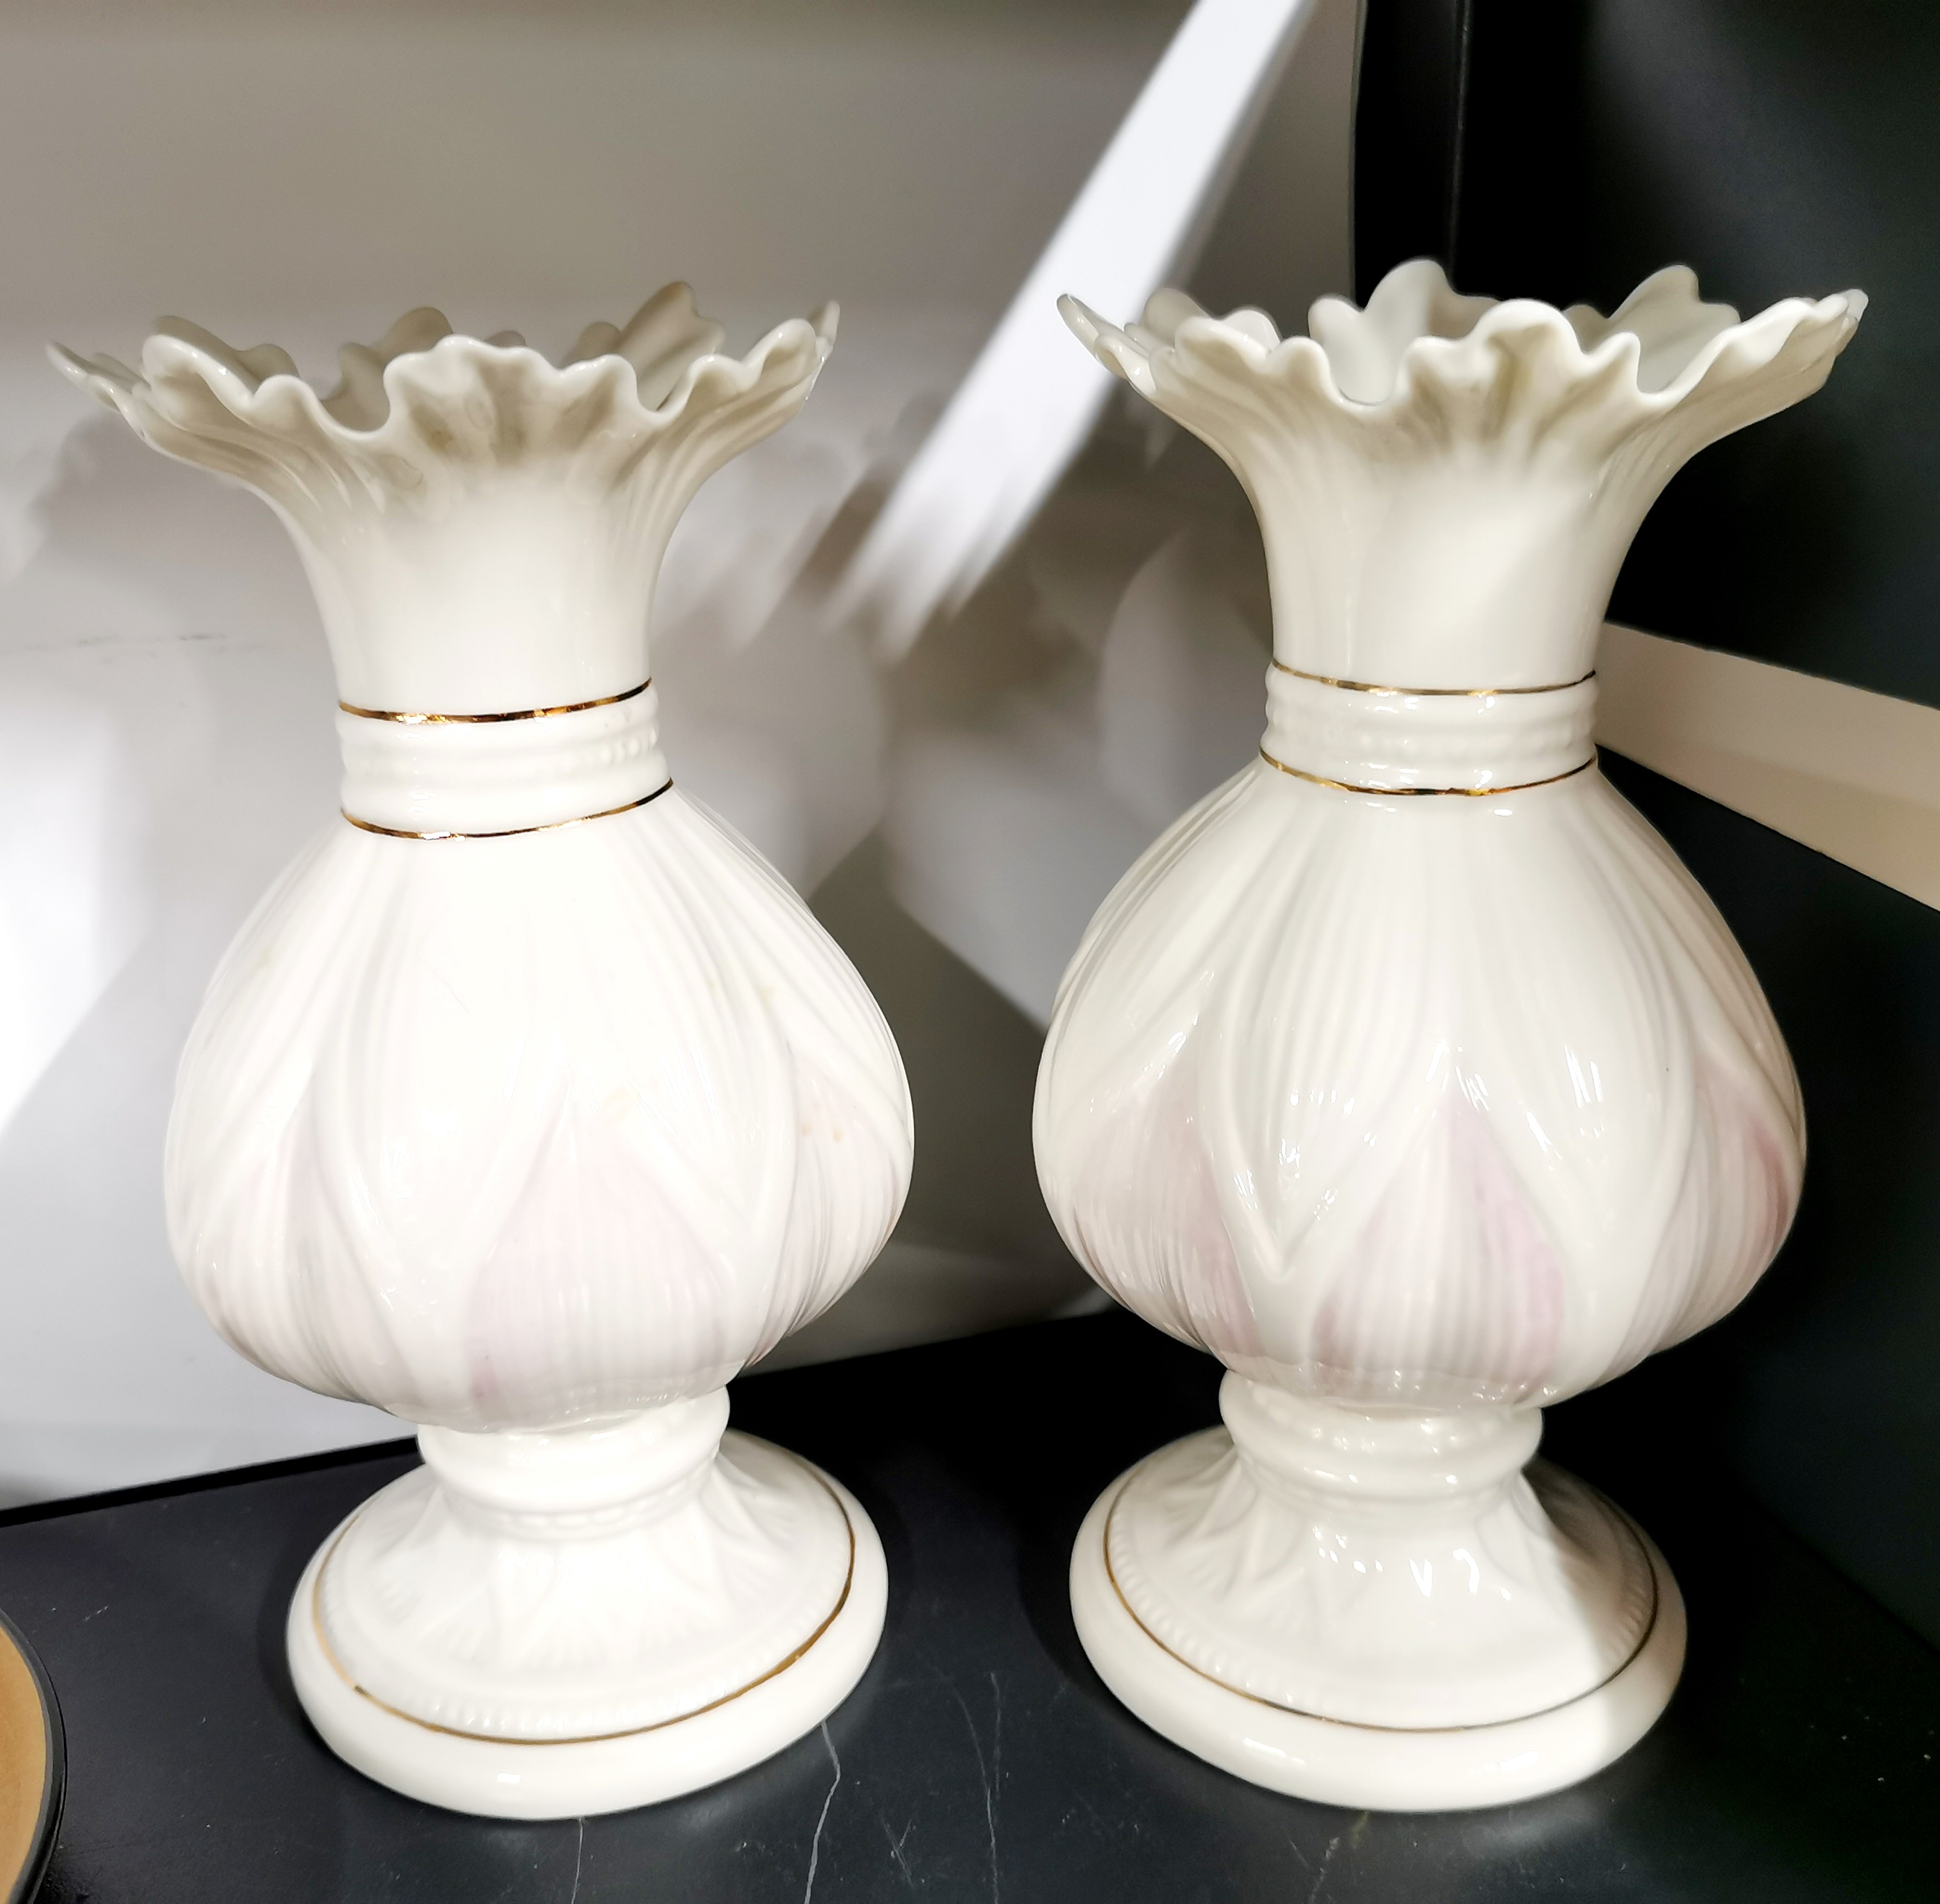 A pair of Belleek porcelain vases, H. 20cm. Together with a further interesting items. - Image 4 of 5